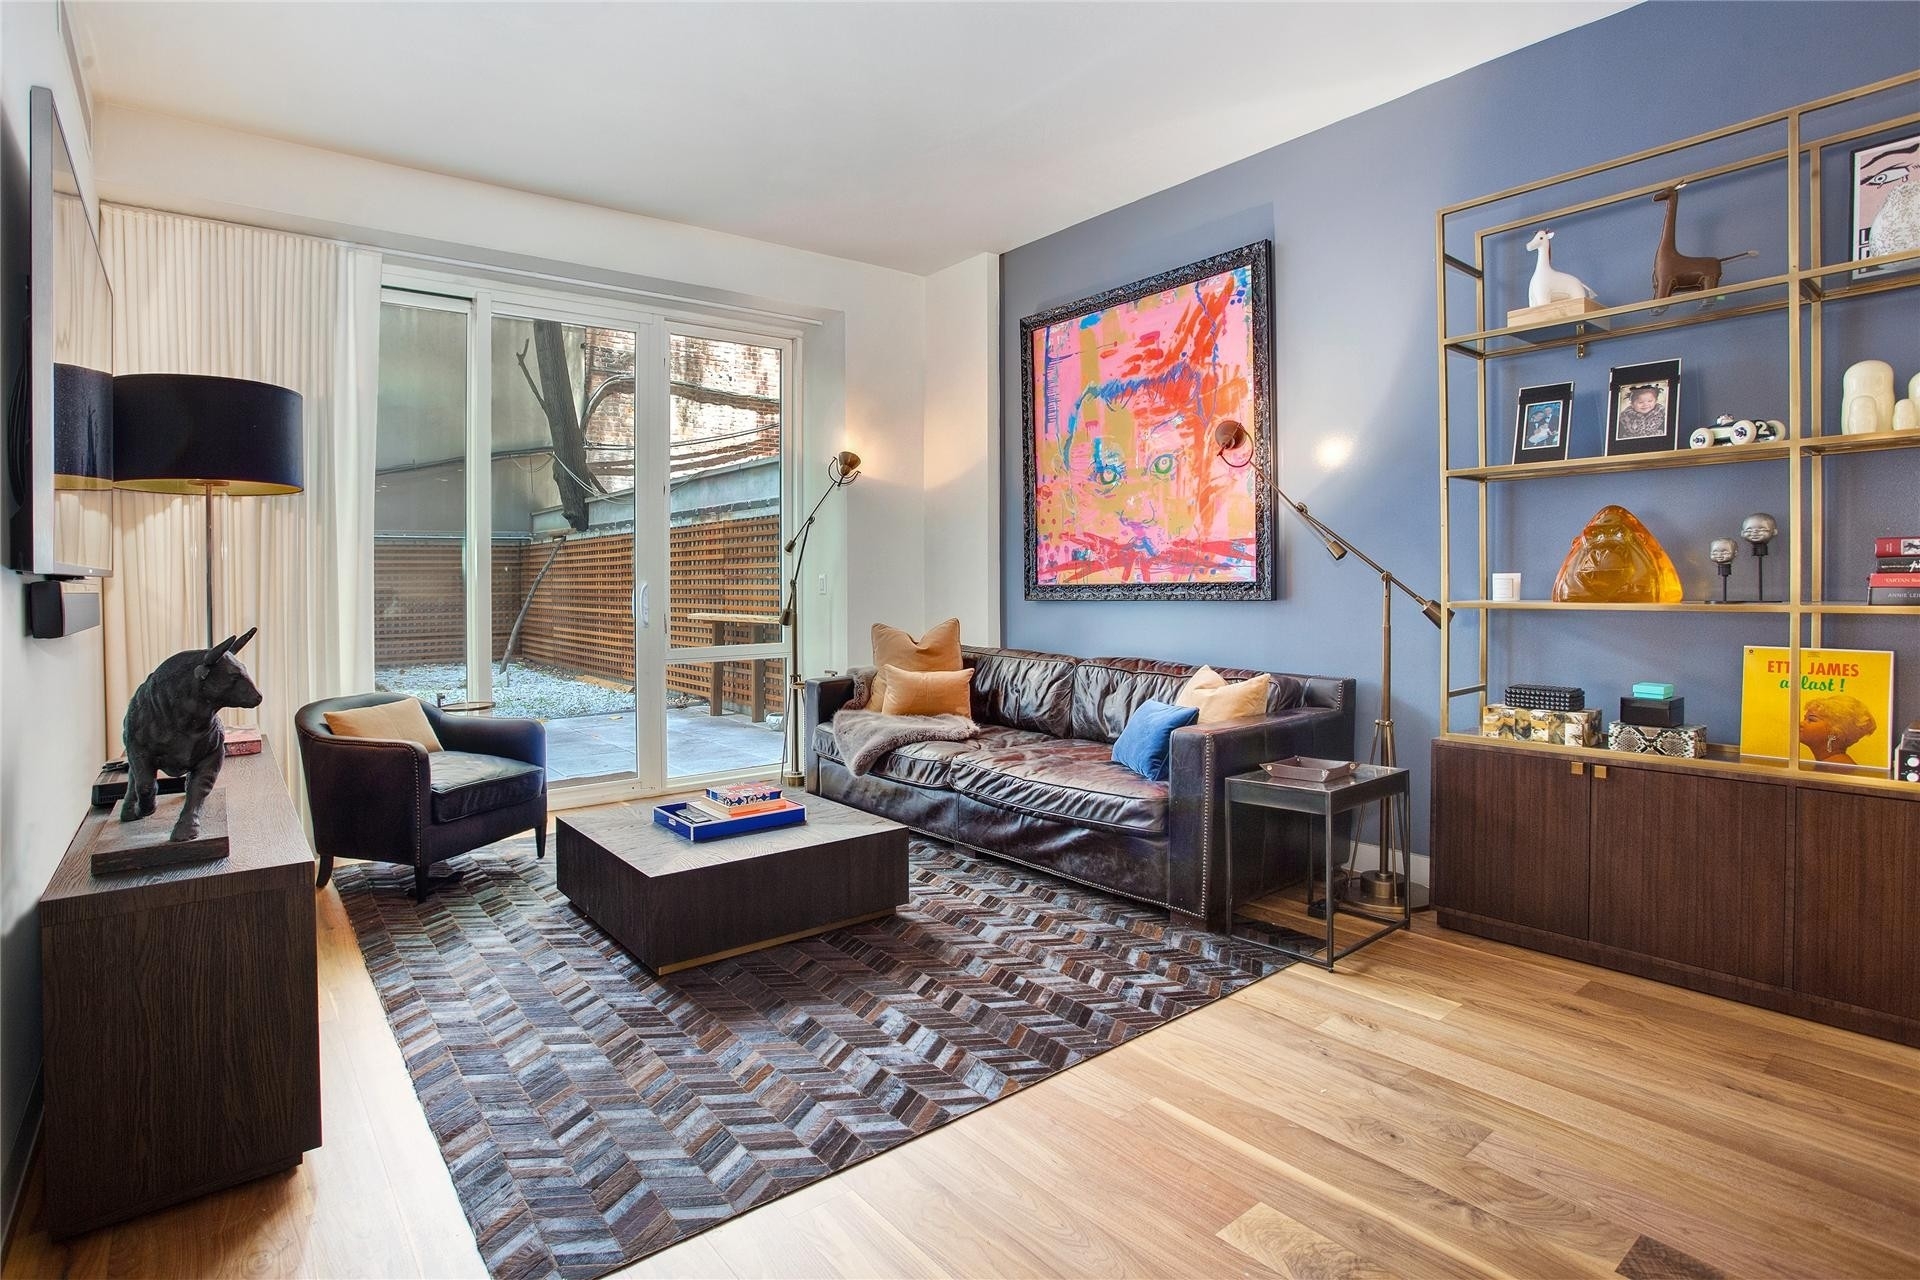 Property at Chelsea Green, 151 West 21st St, GARDENB New York